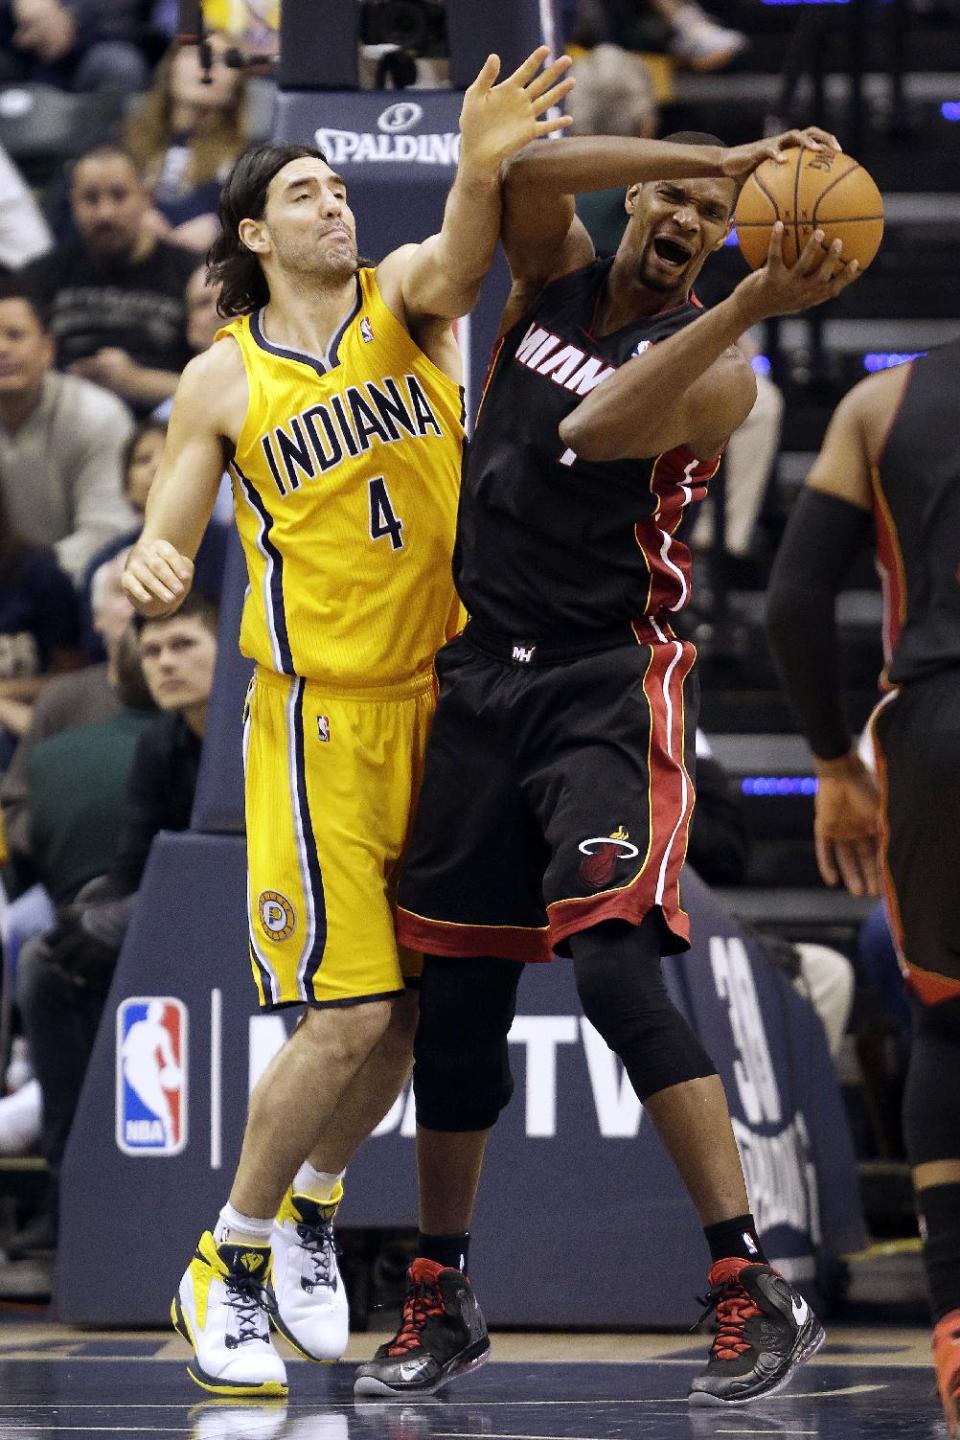 Miami Heat center Chris Bosh, right, pulls in a rebound in front of Indiana Pacers forward Luis Scola, of Argentina, during the first half of an NBA basketball game in Indianapolis, Wednesday, March 26, 2014. (AP Photo/AJ Mast)